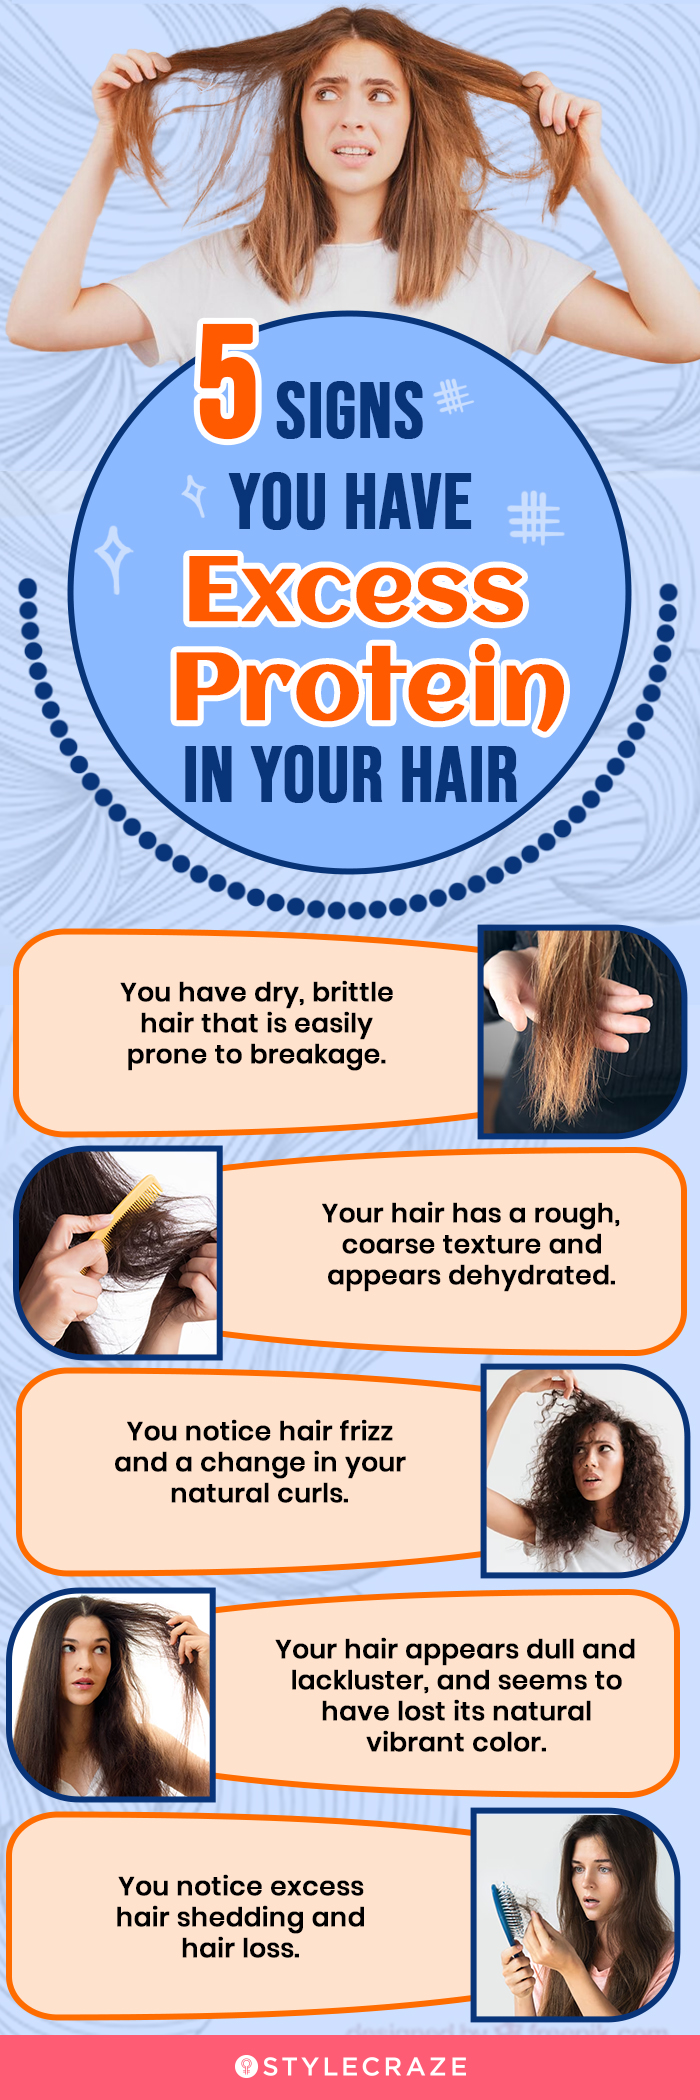 8 Ways To Manage And Prevent Dry Hair